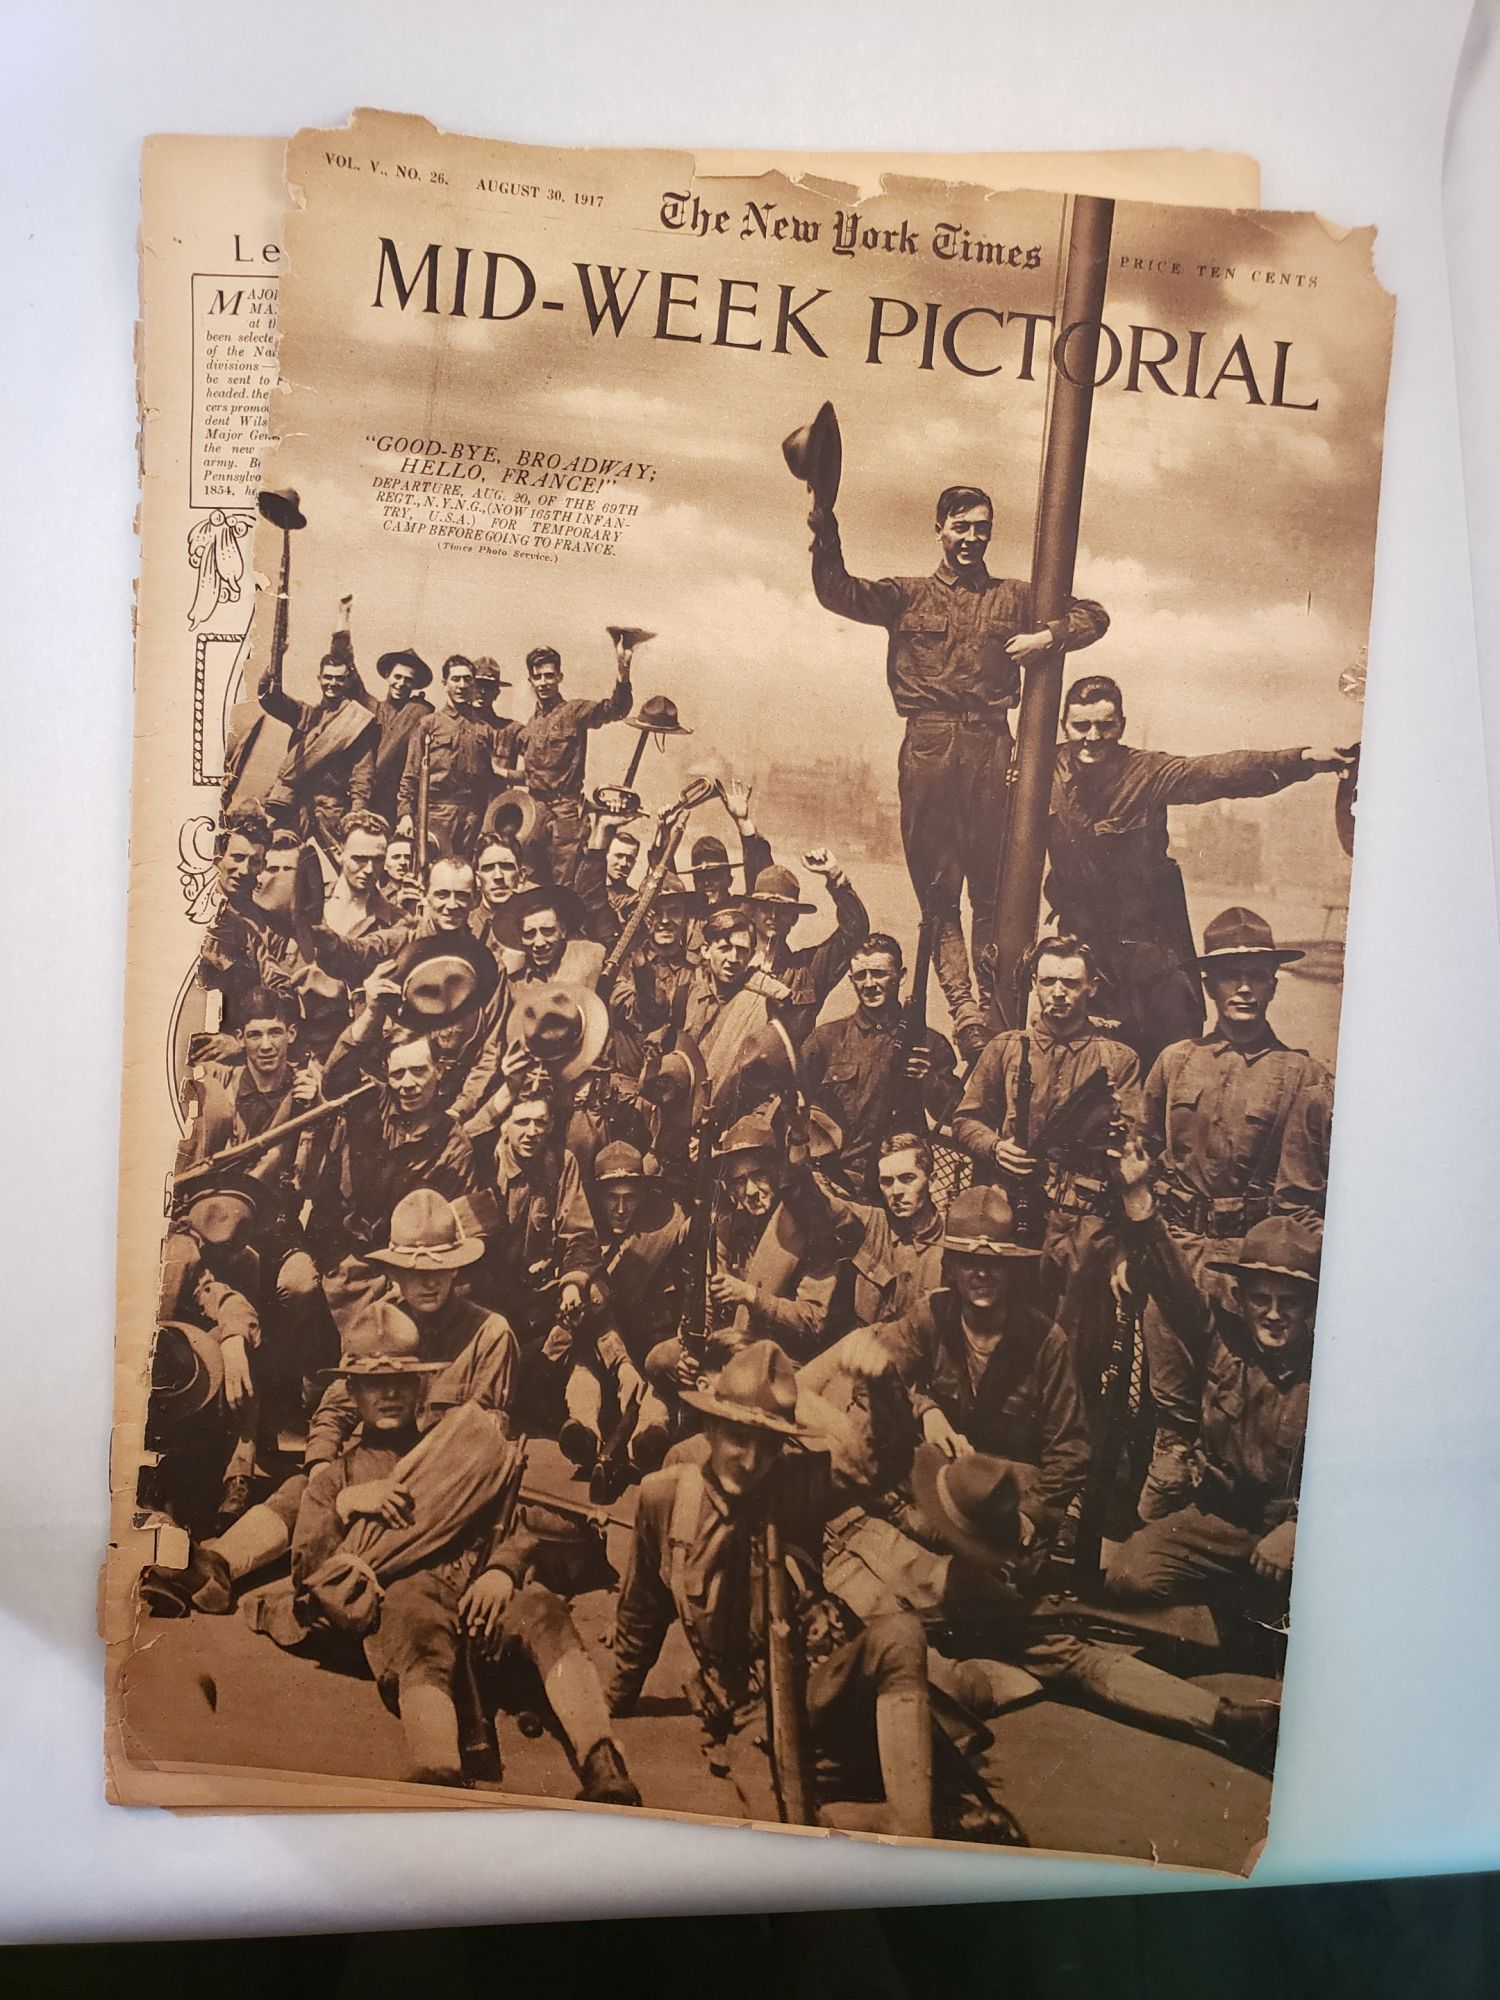 The New York Times Mid-Week Pictorial Vol. V, No. 26, August 30, 1917 by  n/a on WellRead Books